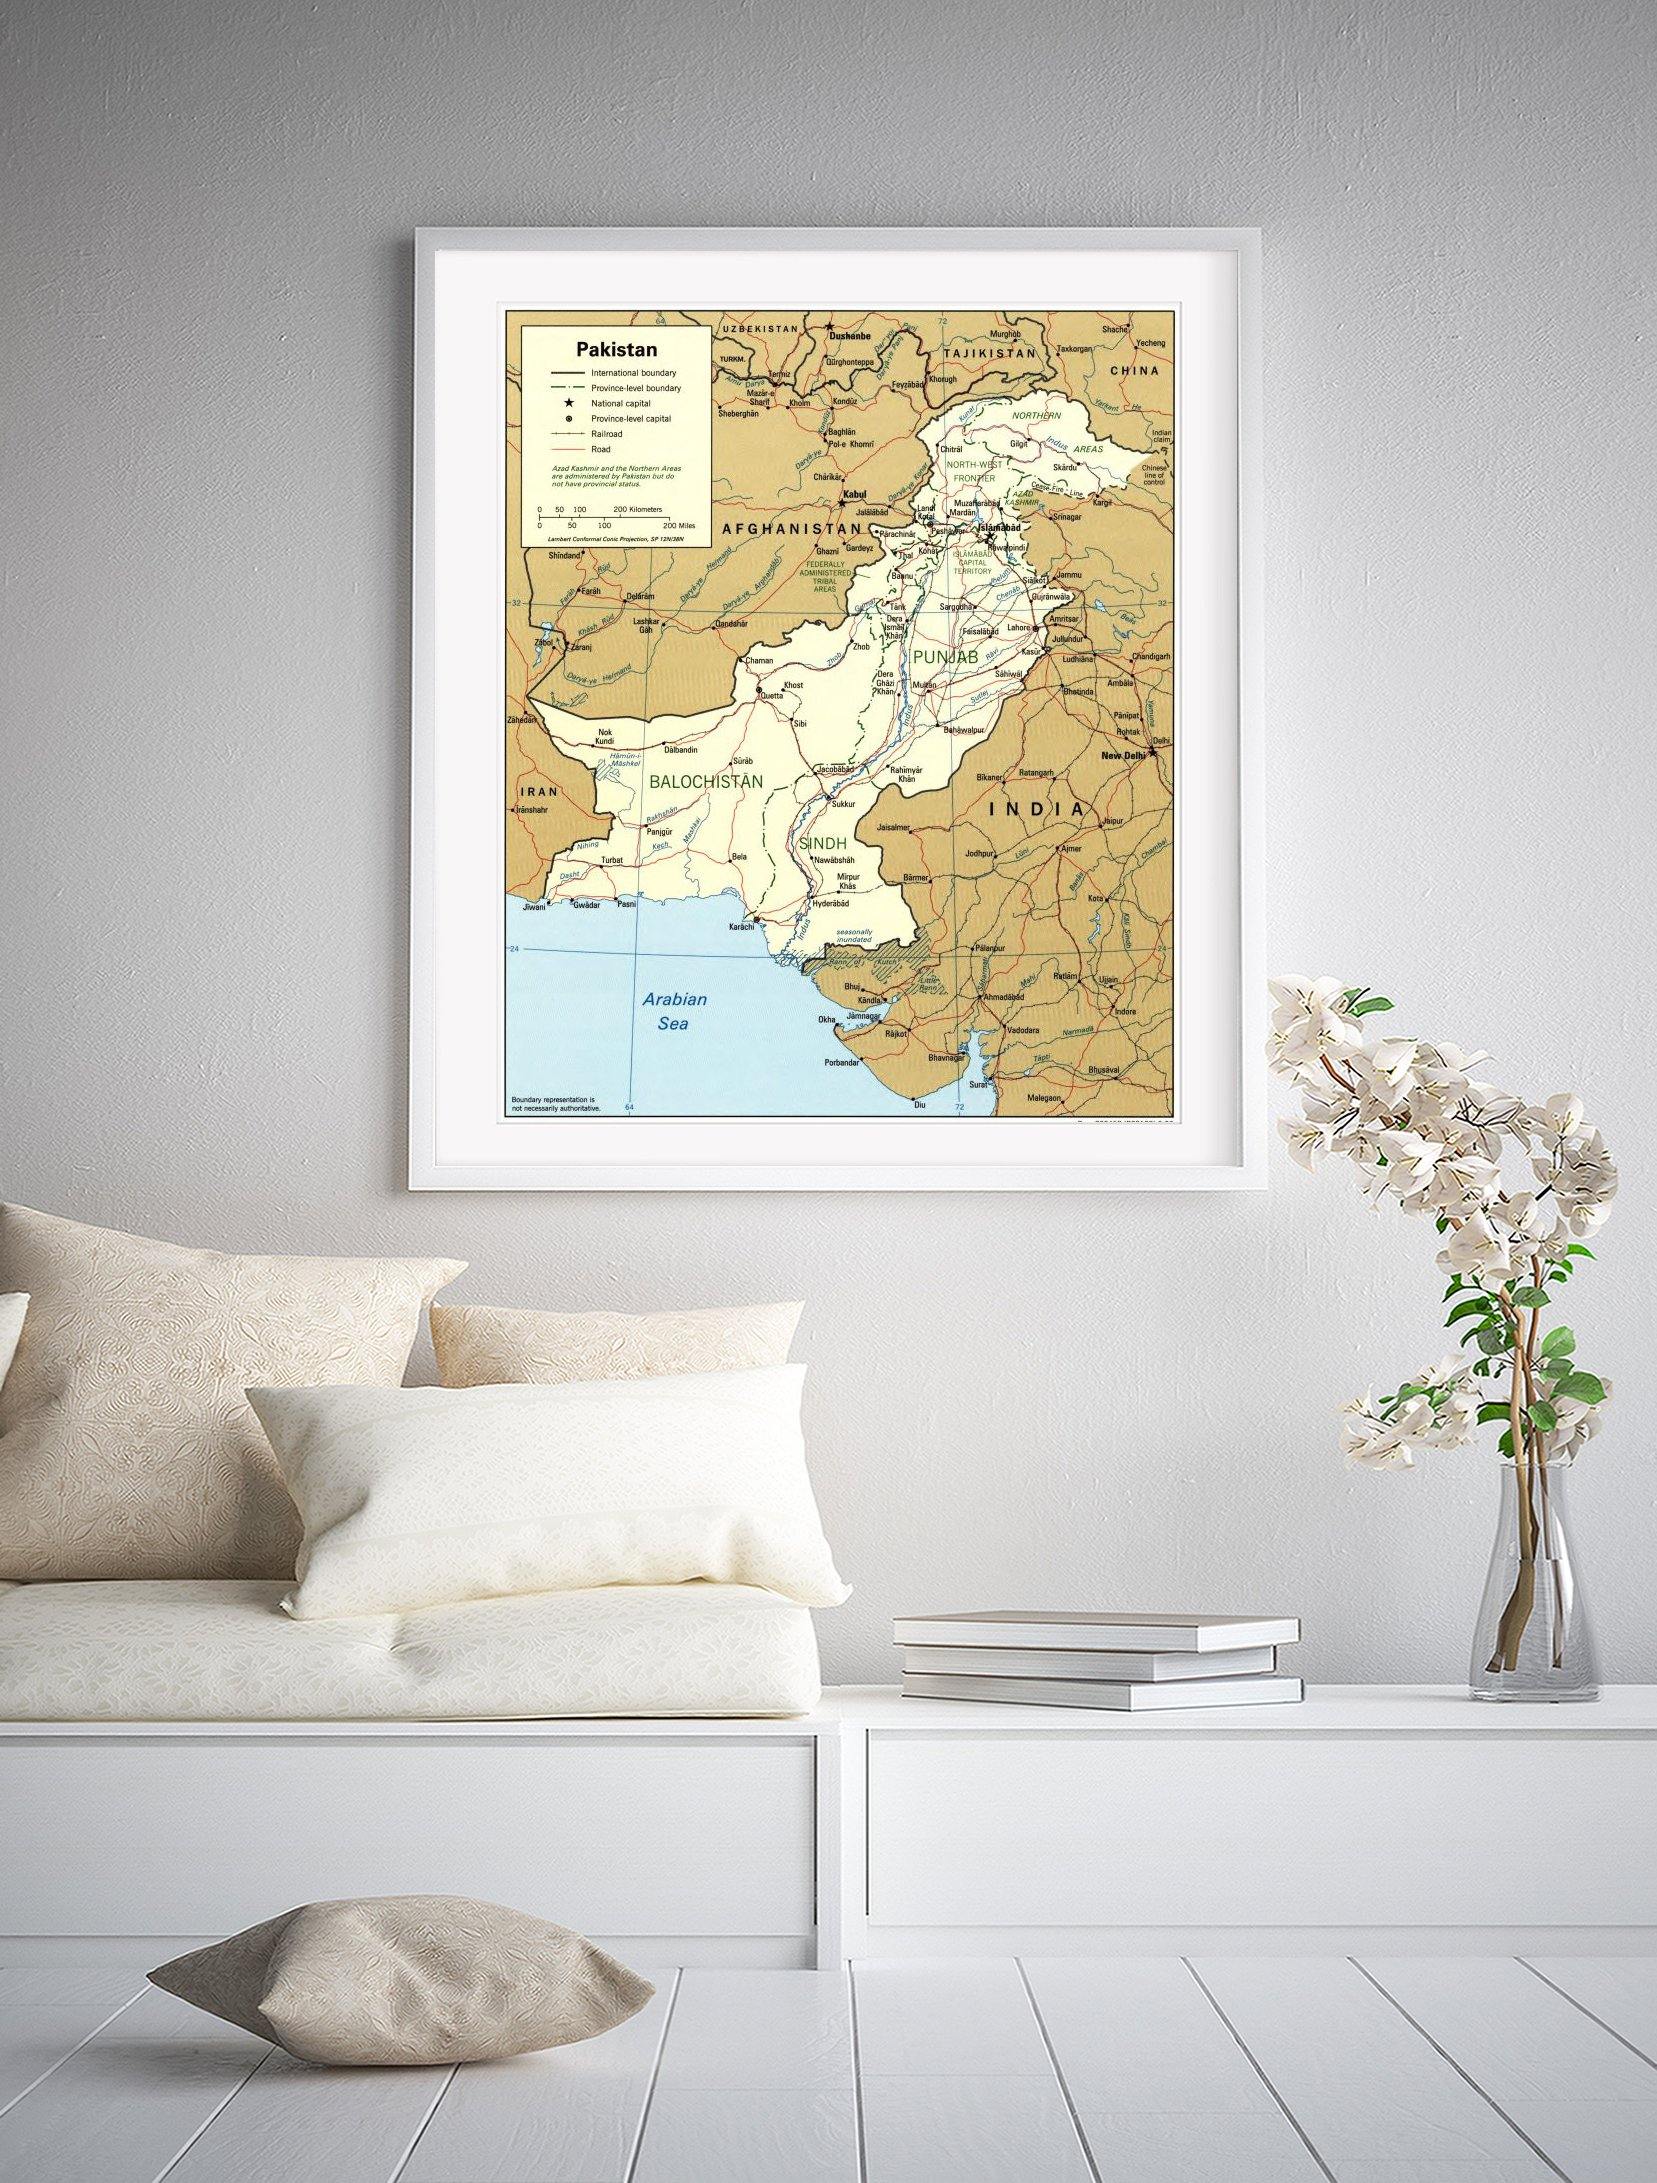 1996 Map| Pakistan| Pakistan Map Size: 20 inches x 24 inches |Fits 20x - New York Map Company